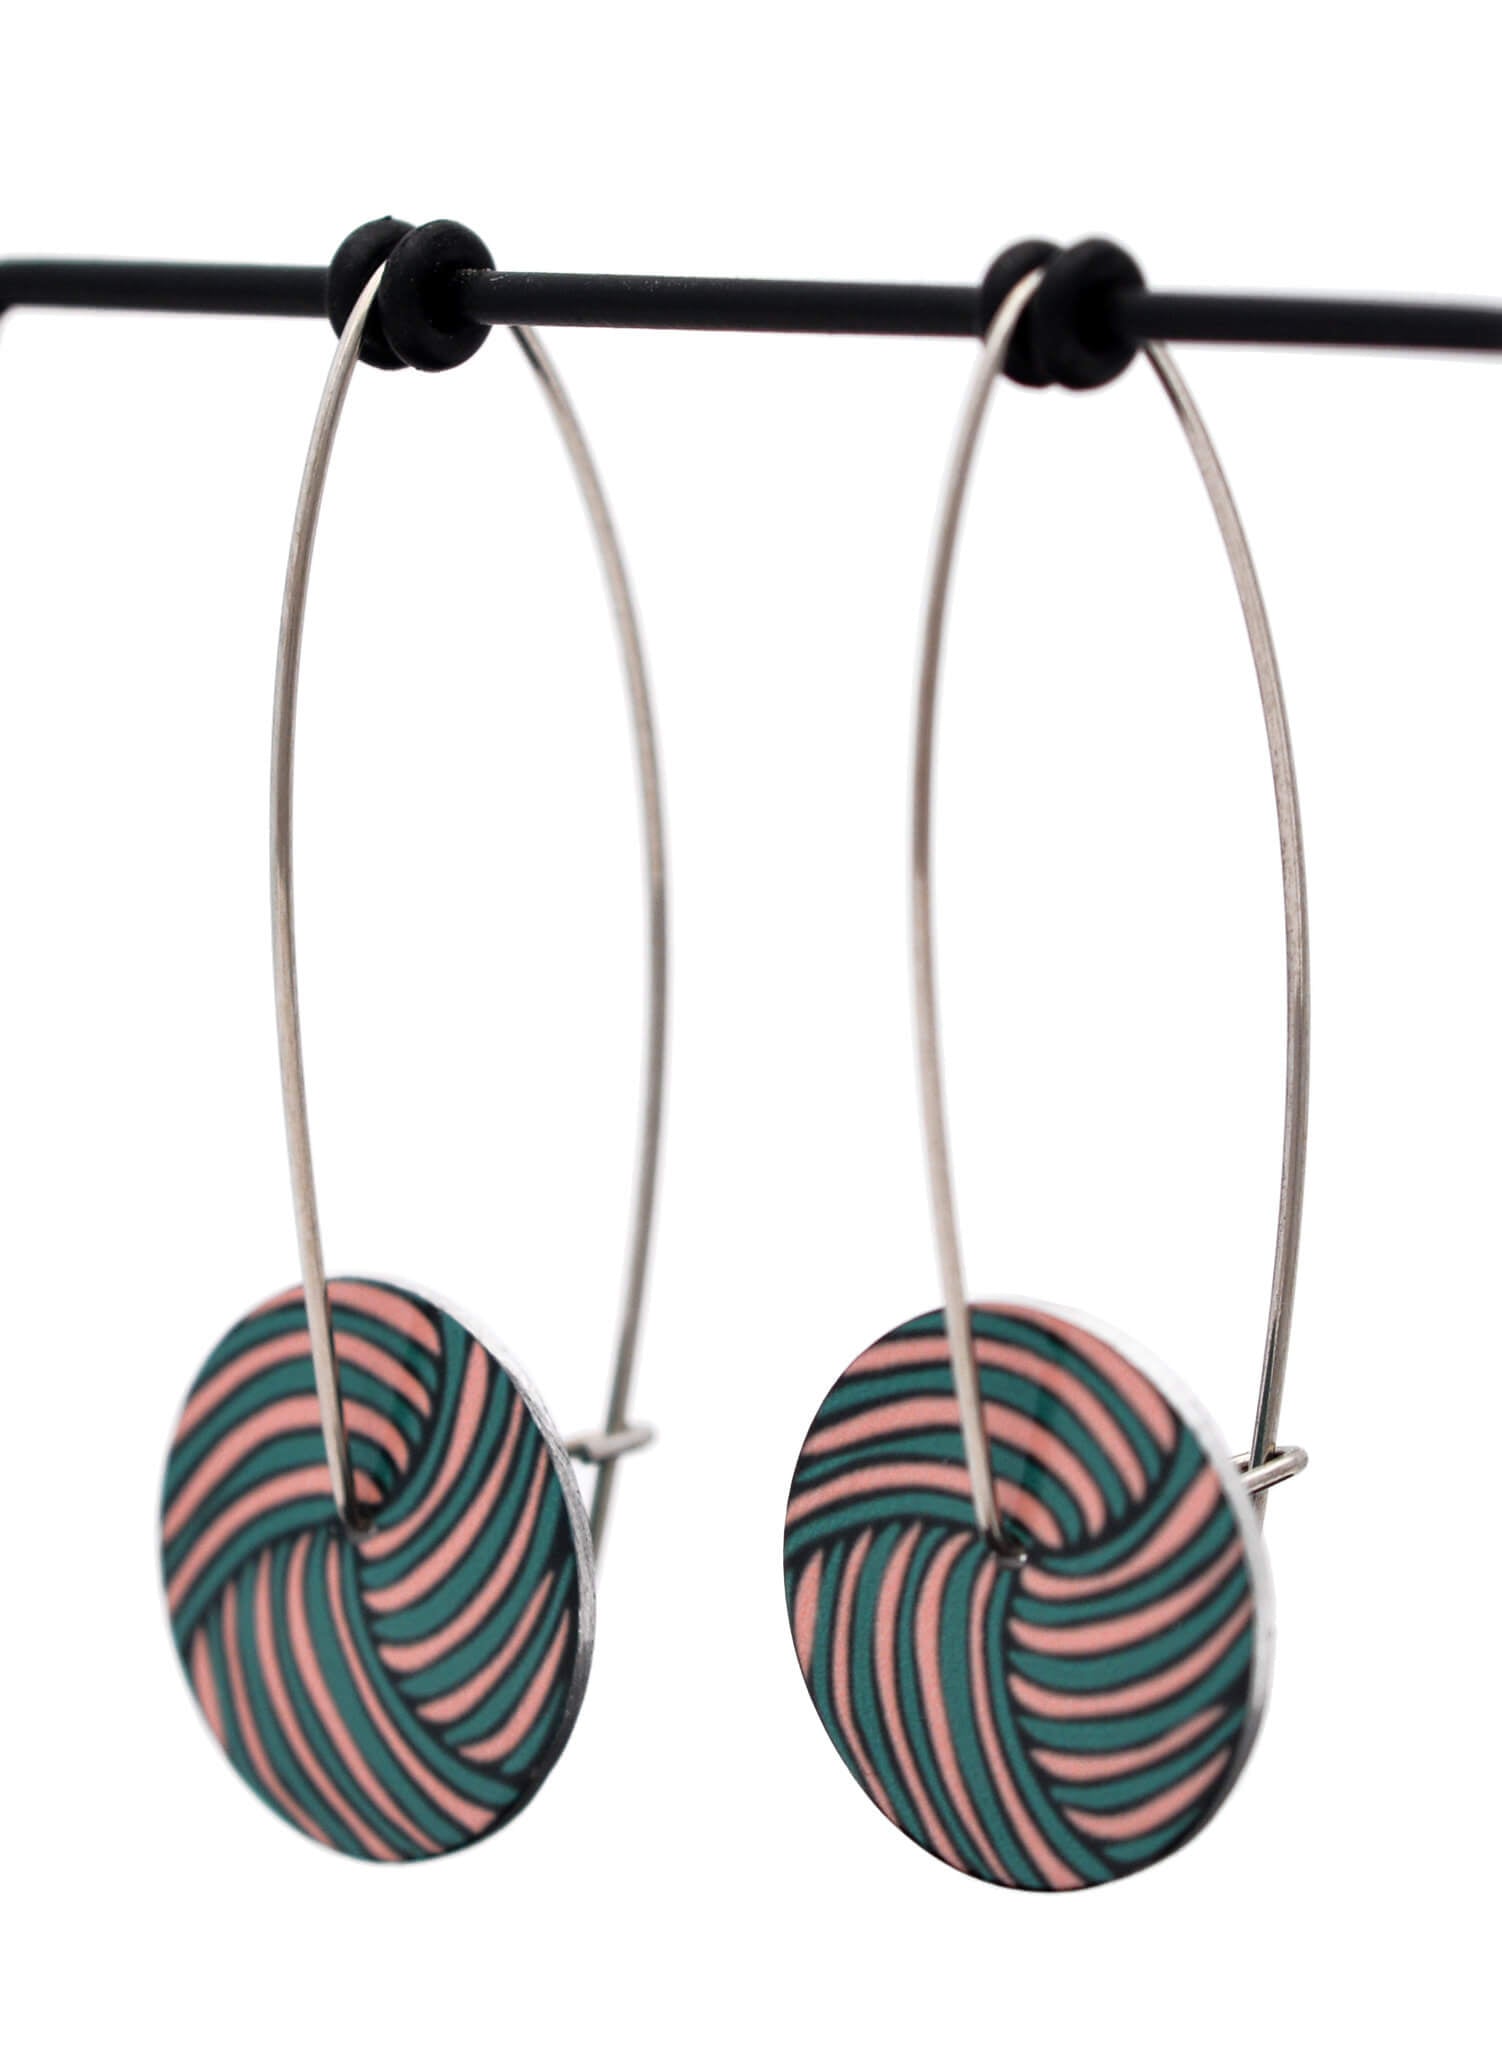 Woven knot - Vintage button sketch - circle drop hook earrings